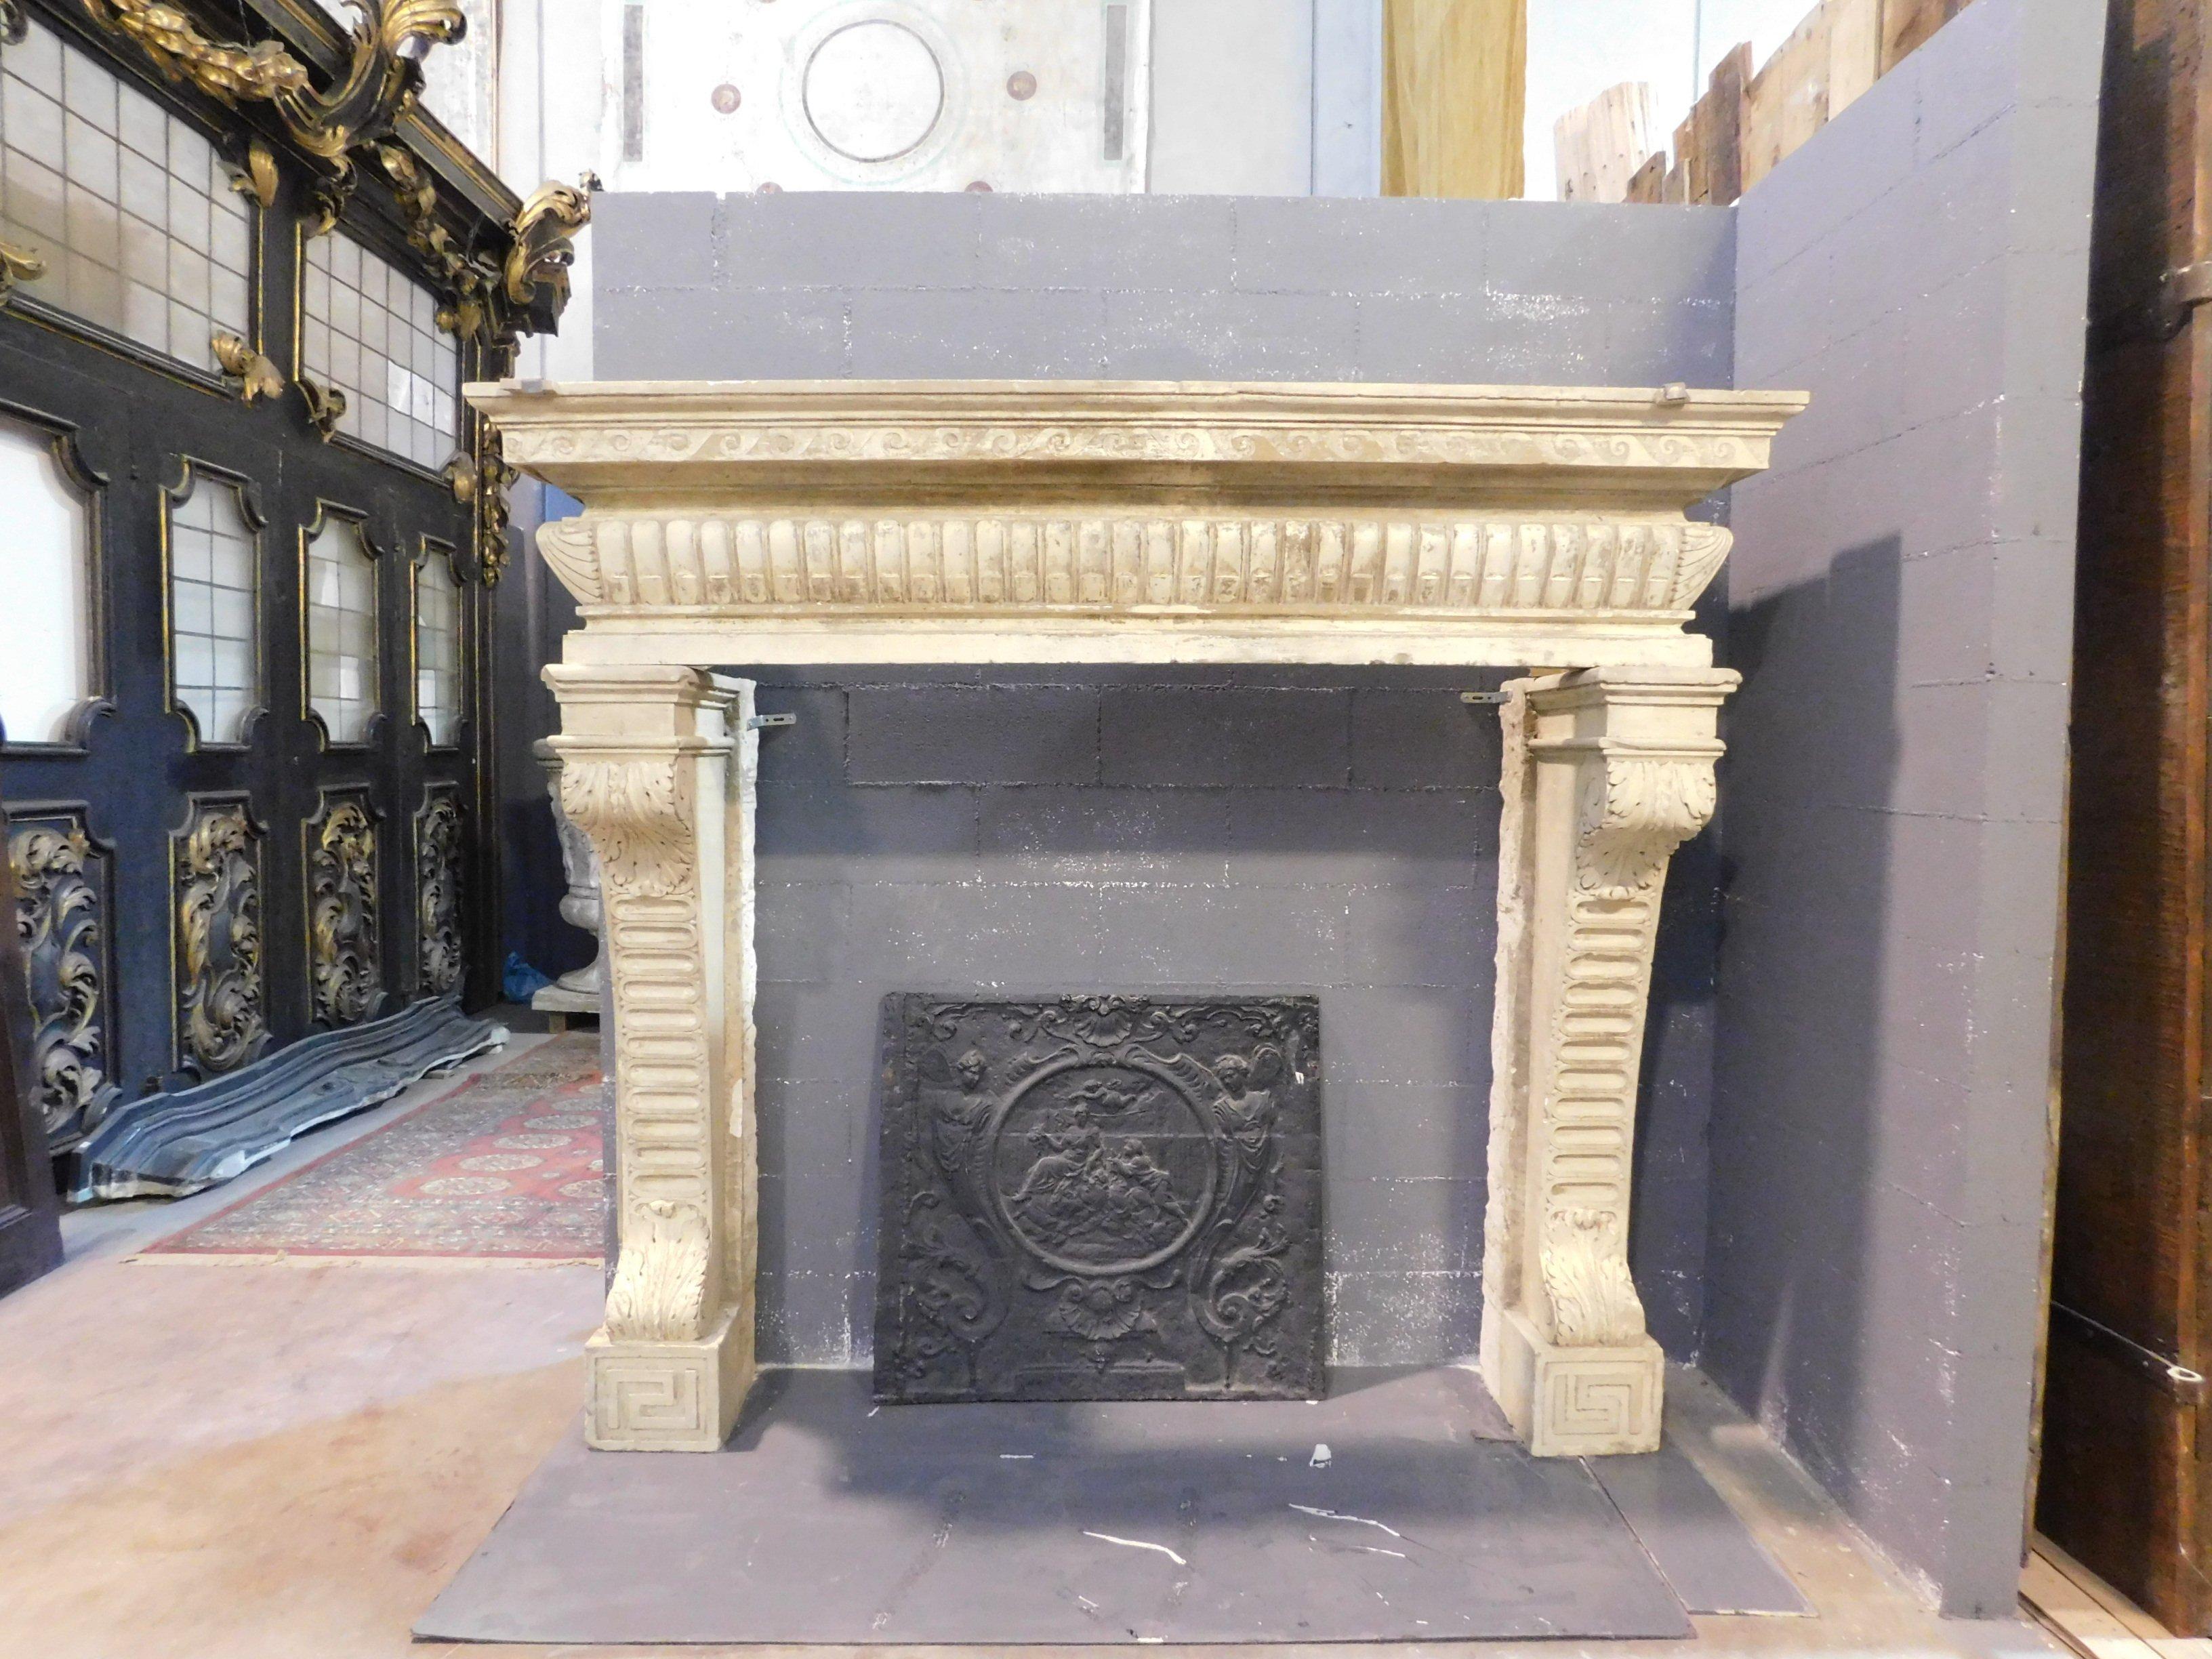 Hand-Carved Ancient Monumental Stone Fireplace, Important with Sculptures from 16th Century